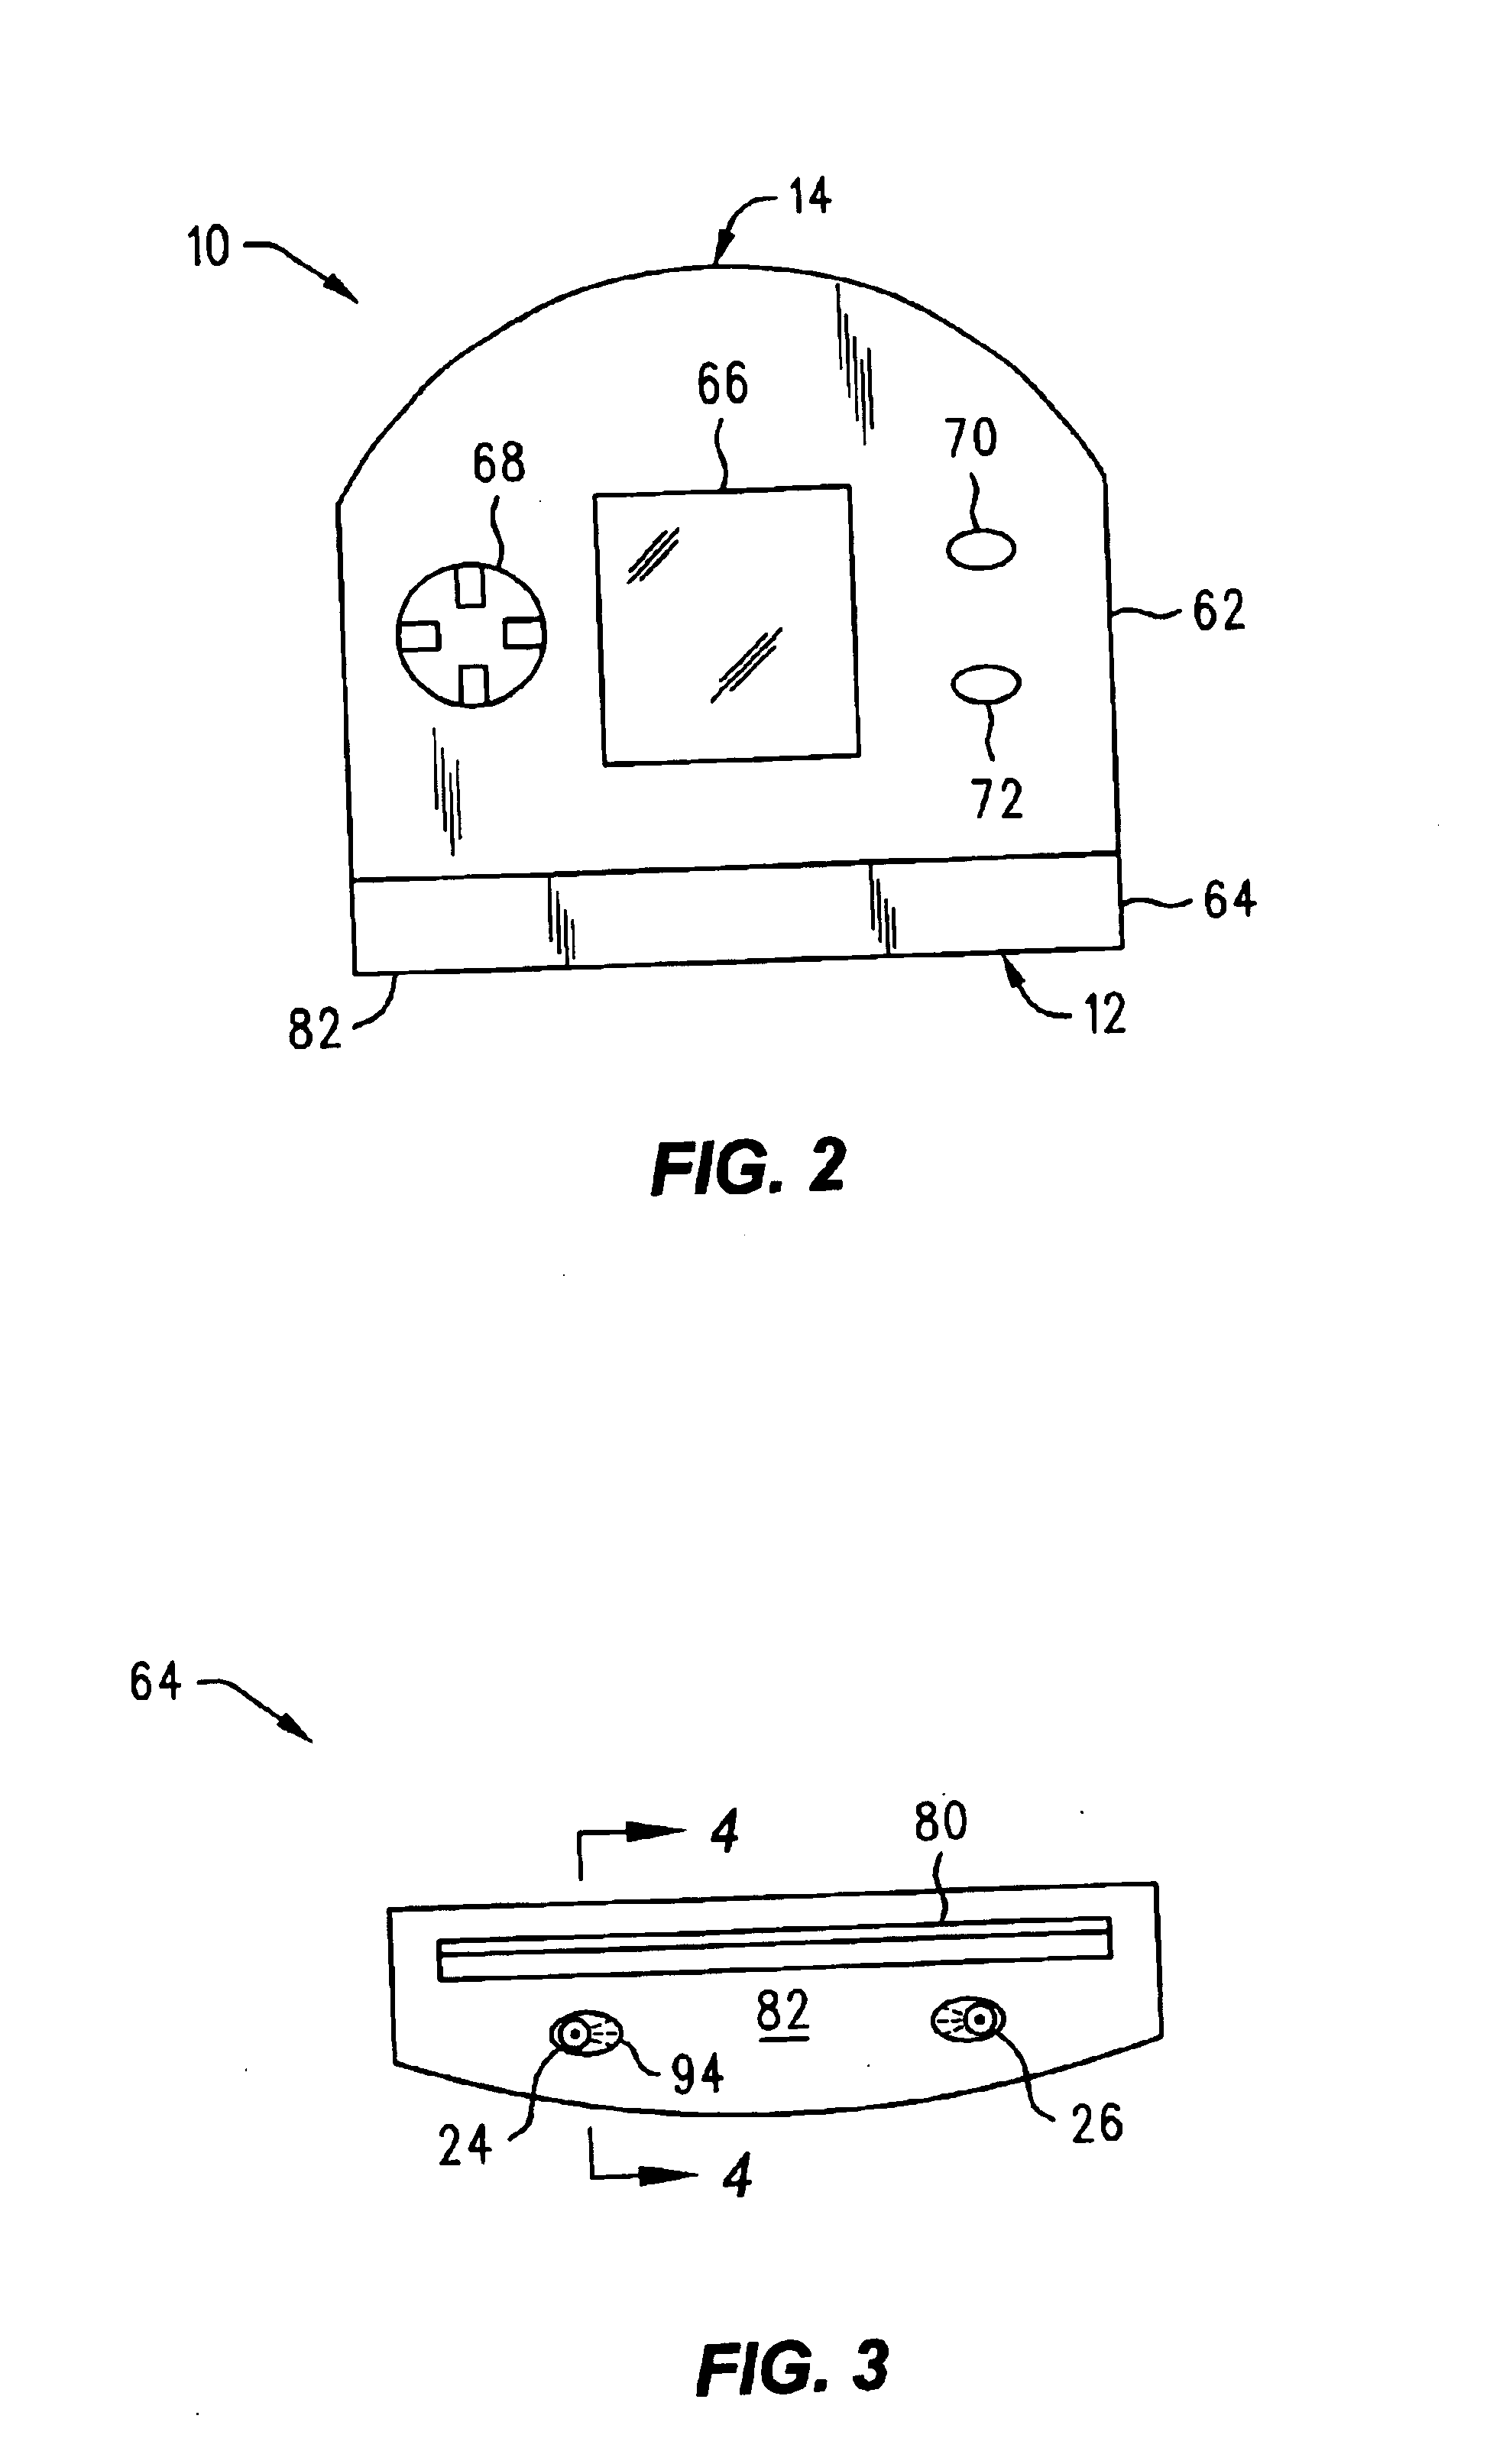 Optical system for compensating for non-uniform illumination of an object